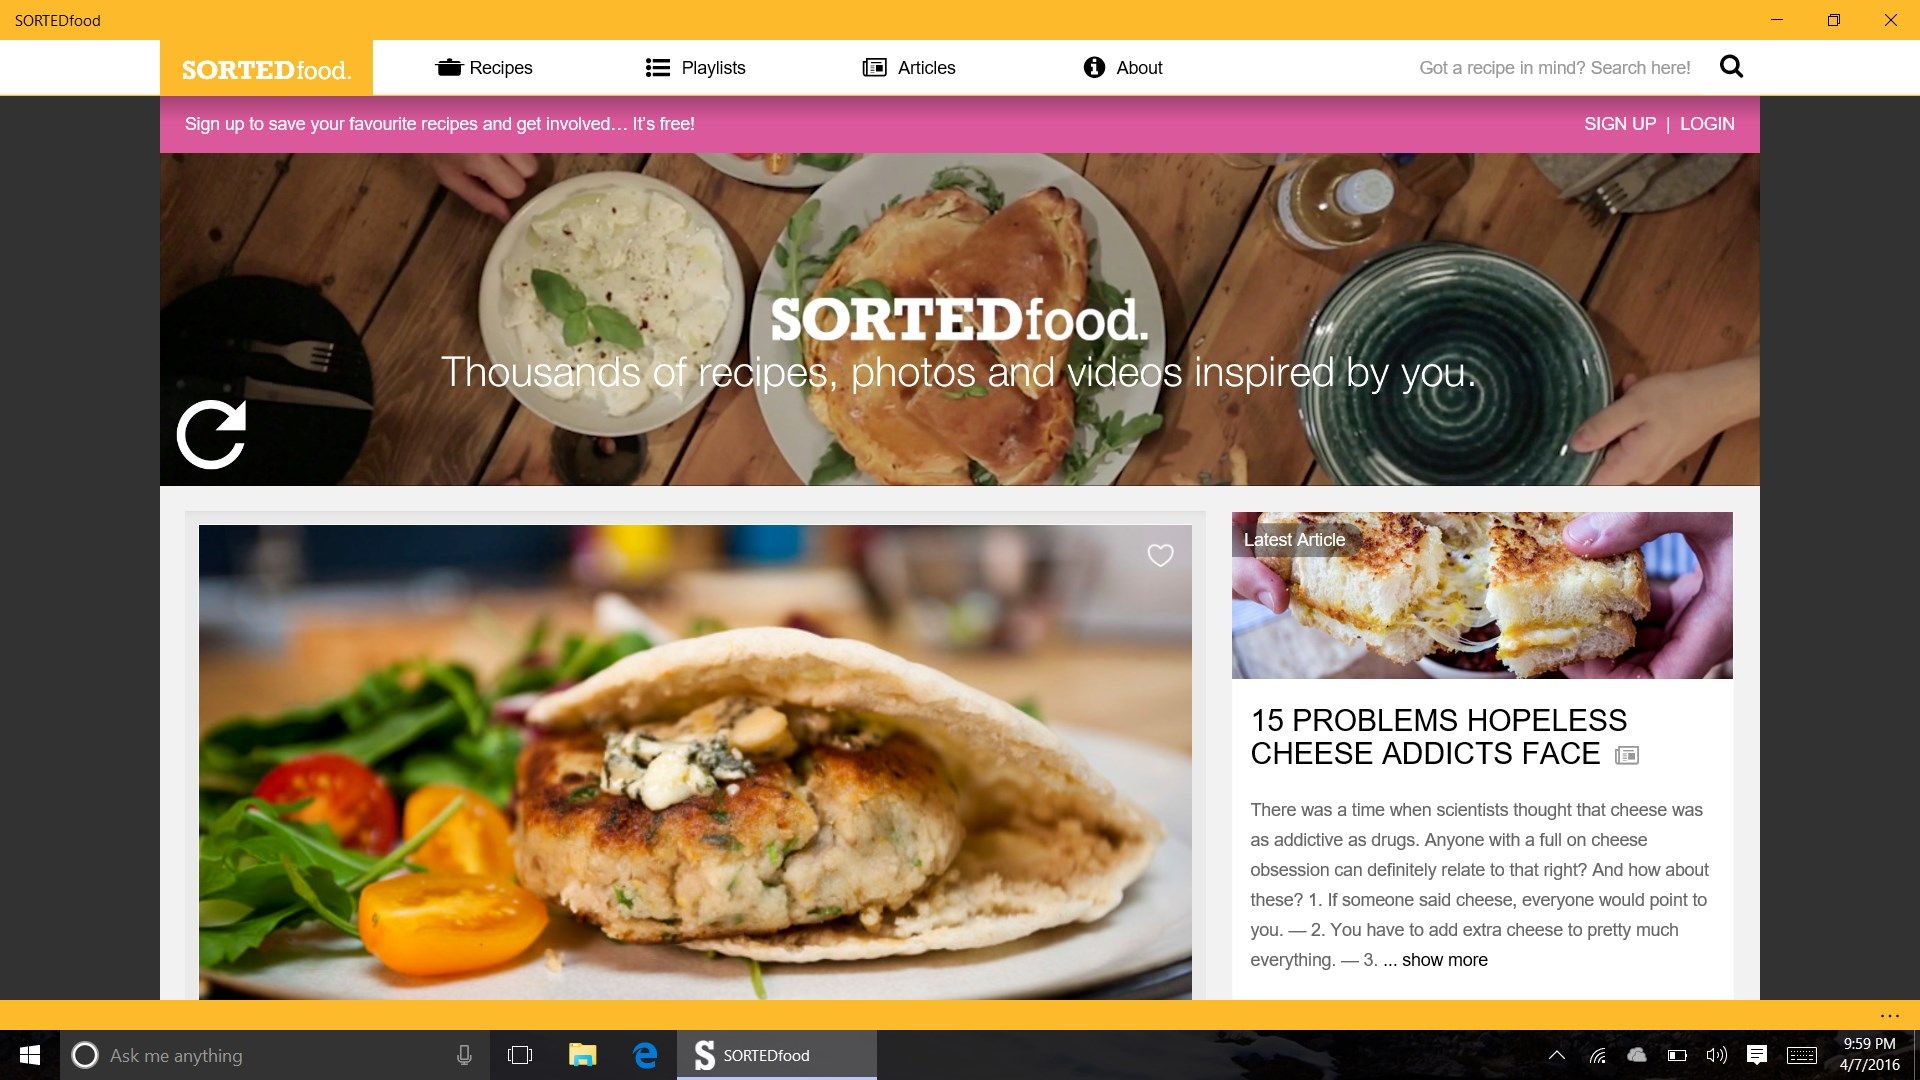 Browse the latest from the SORTEDfood community through the app.